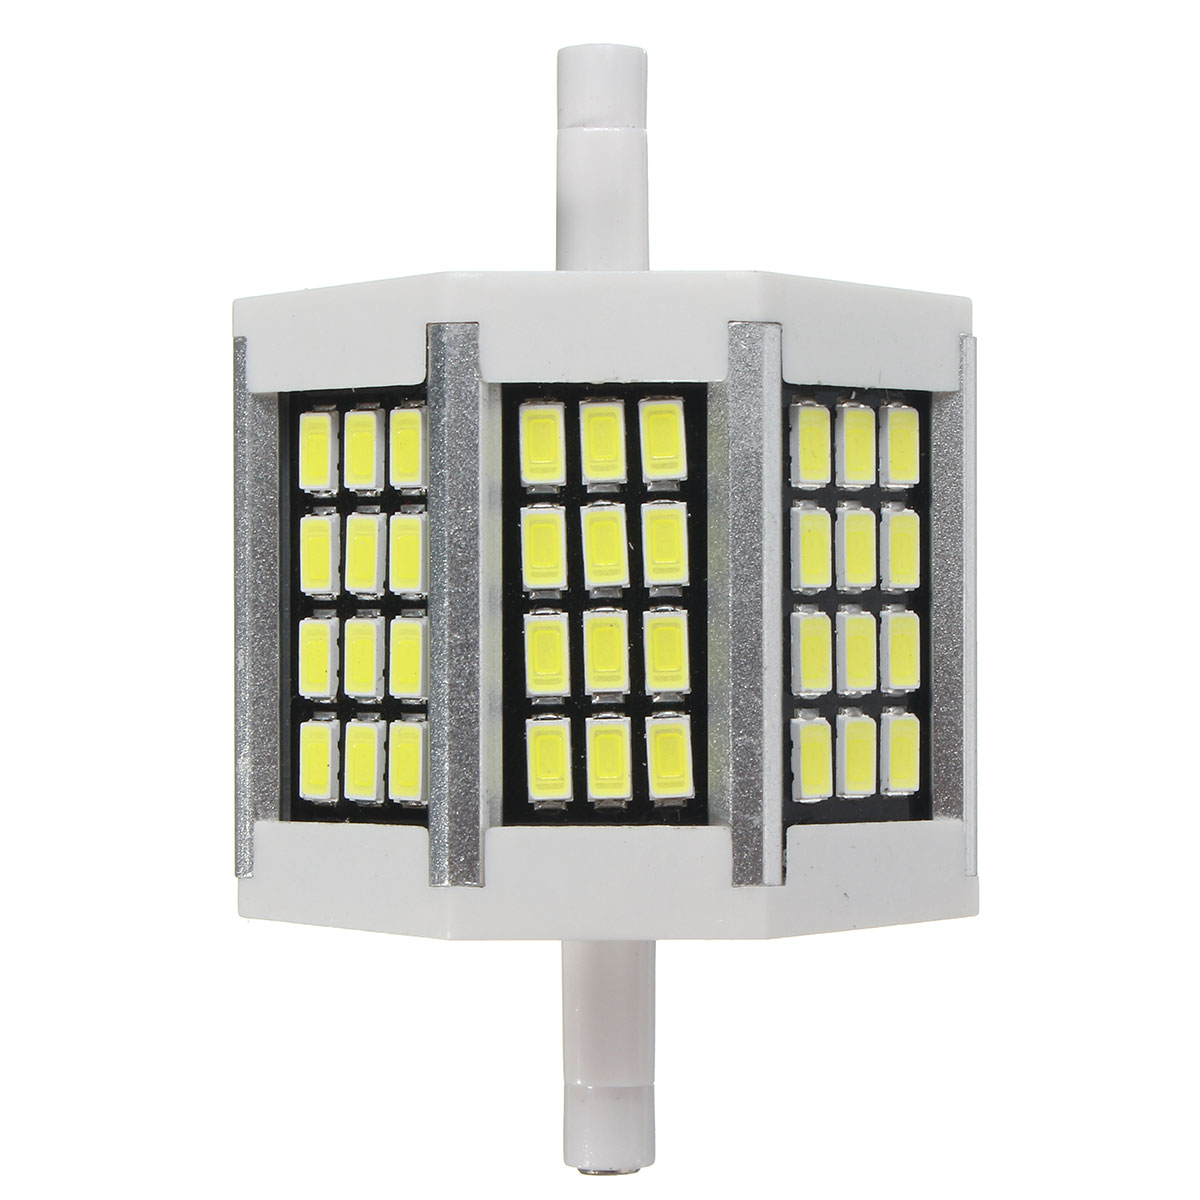 78MM-Non-dimmable-R7S-SMD5733-Warm-White-Pure-White-36-LED-Light-Bulb-AC110V-AC220V-1430529-6